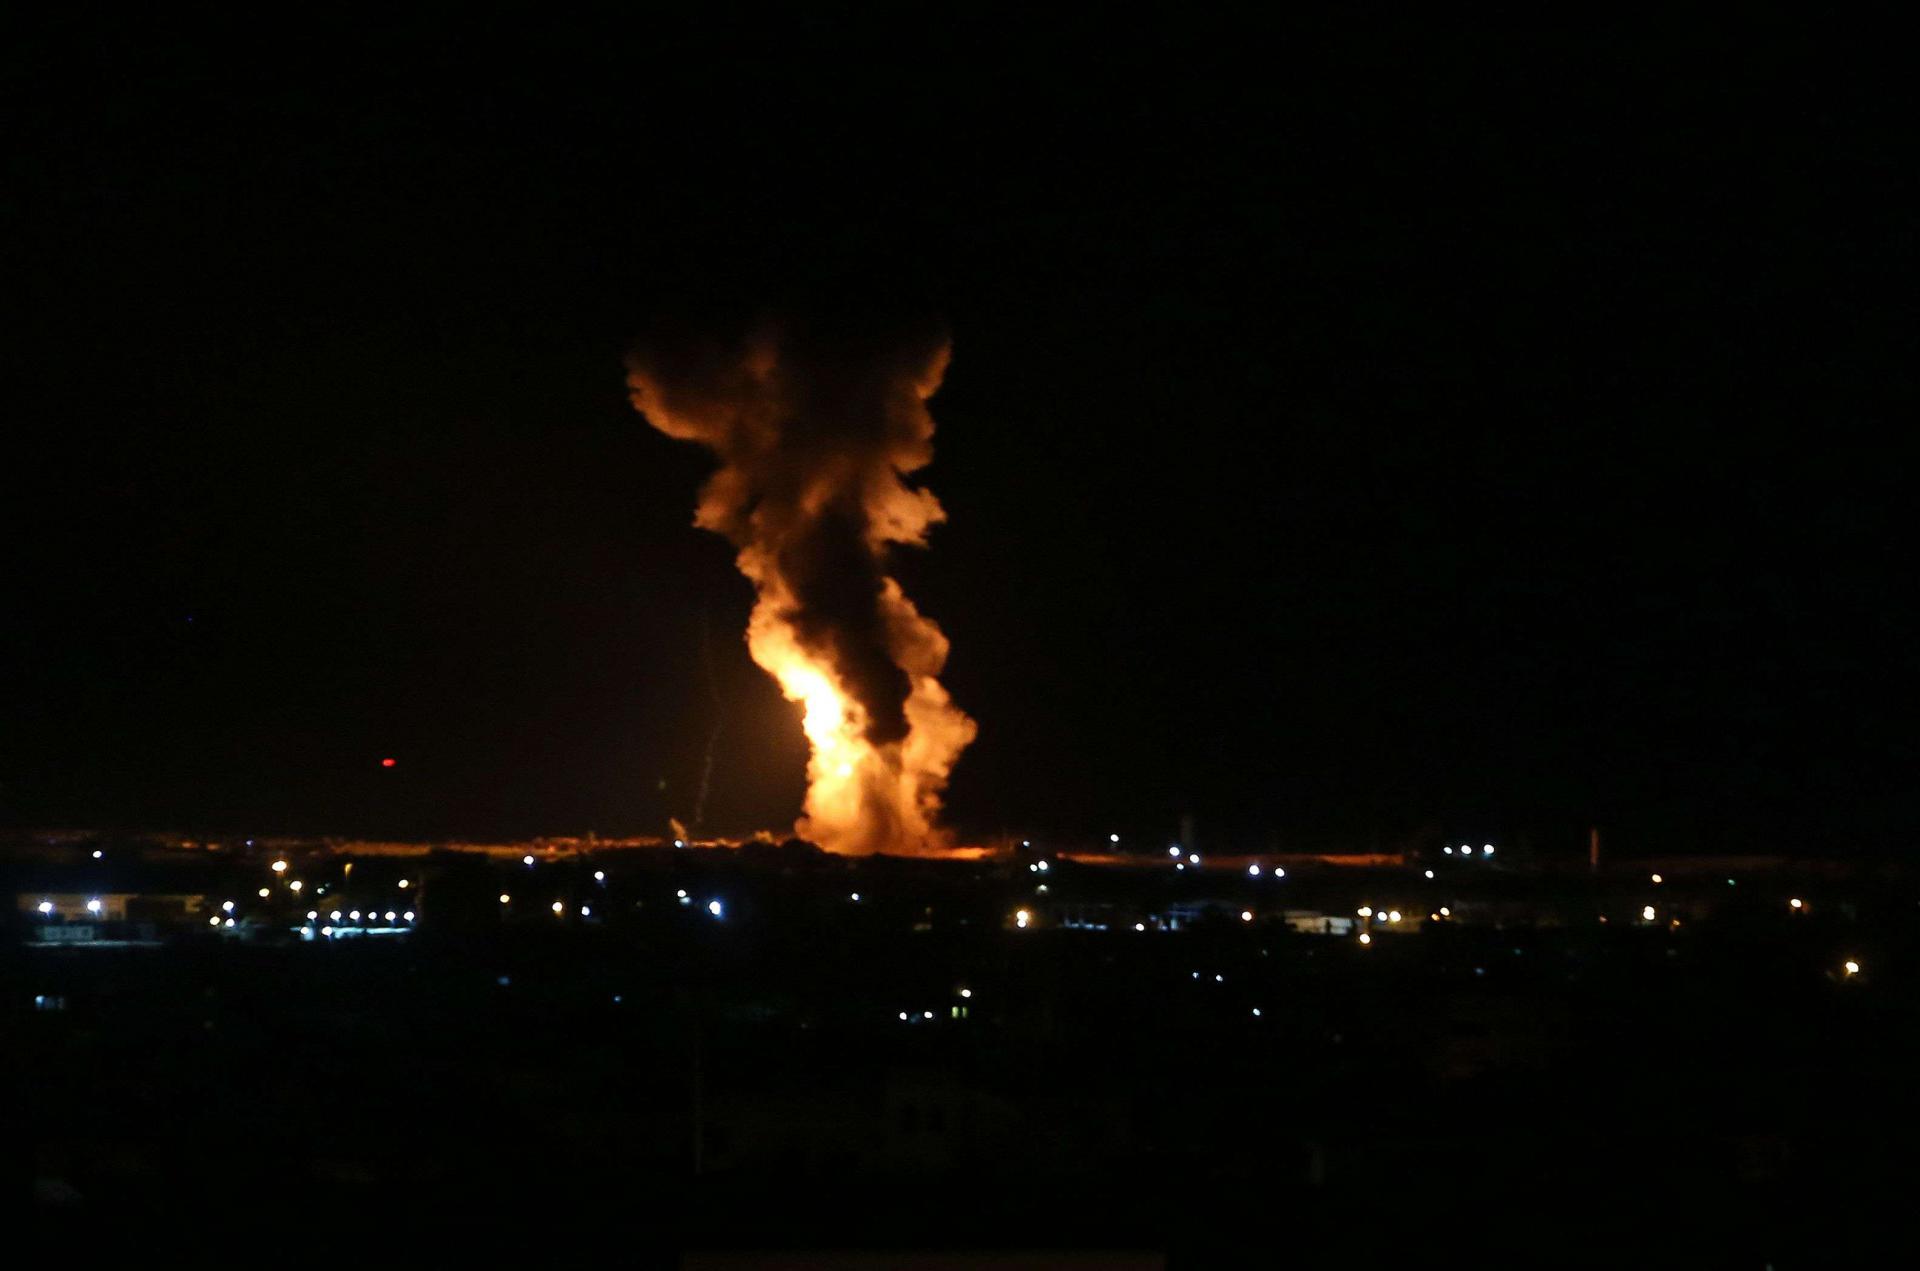 Israel and Hamas have fought three wars since 2008 and the tit-for-tat fire has raised fear of another conflict.